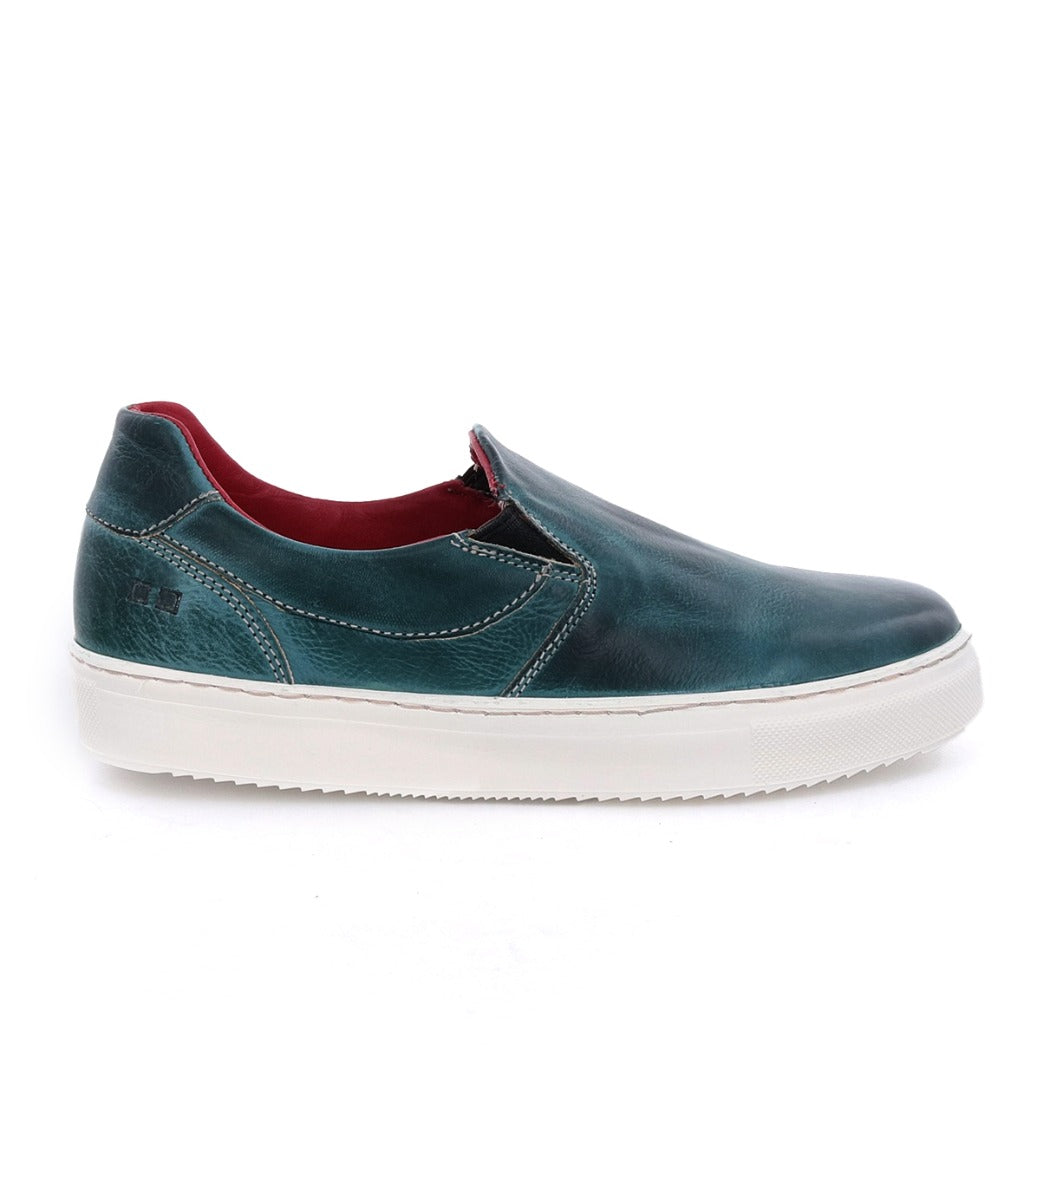 A women's blue slip on sneaker with a white sole named Hermione by Bed Stu.